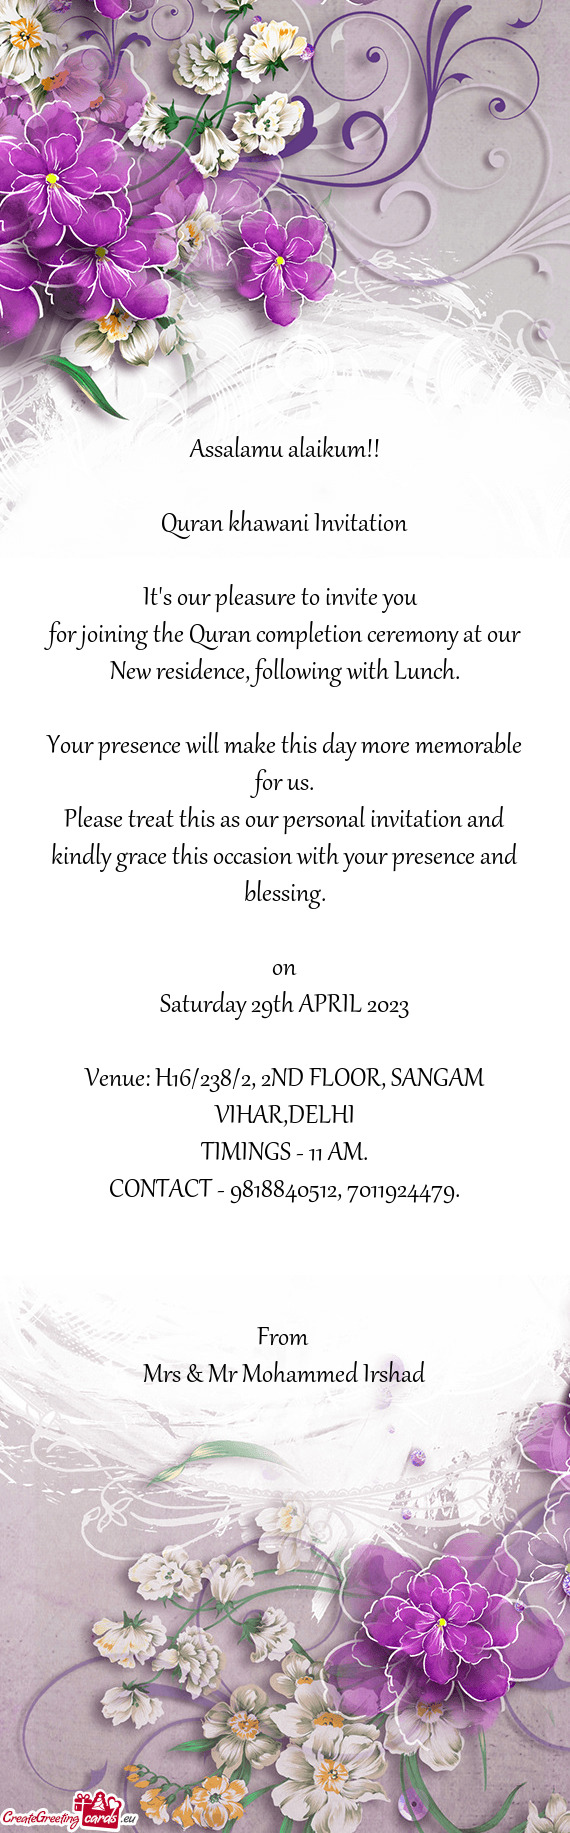 For joining the Quran completion ceremony at our New residence, following with Lunch